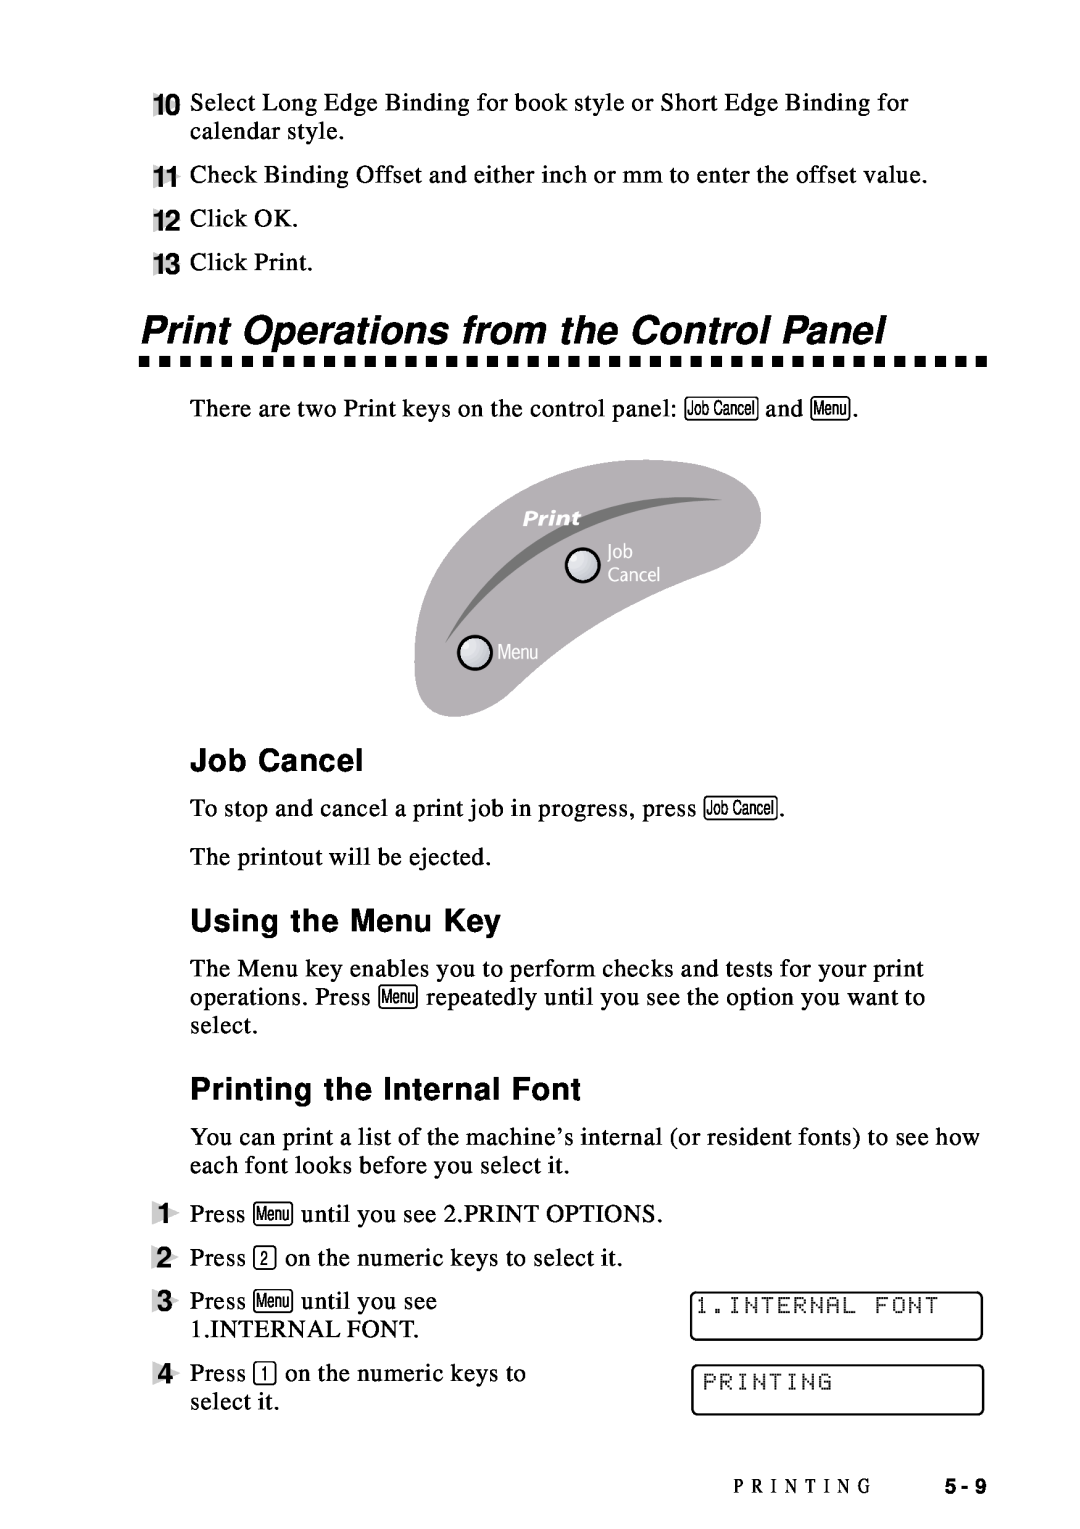 Brother DCP1200 manual Print Operations from the Control Panel, Job Cancel, Using the Menu Key, Printing the Internal Font 